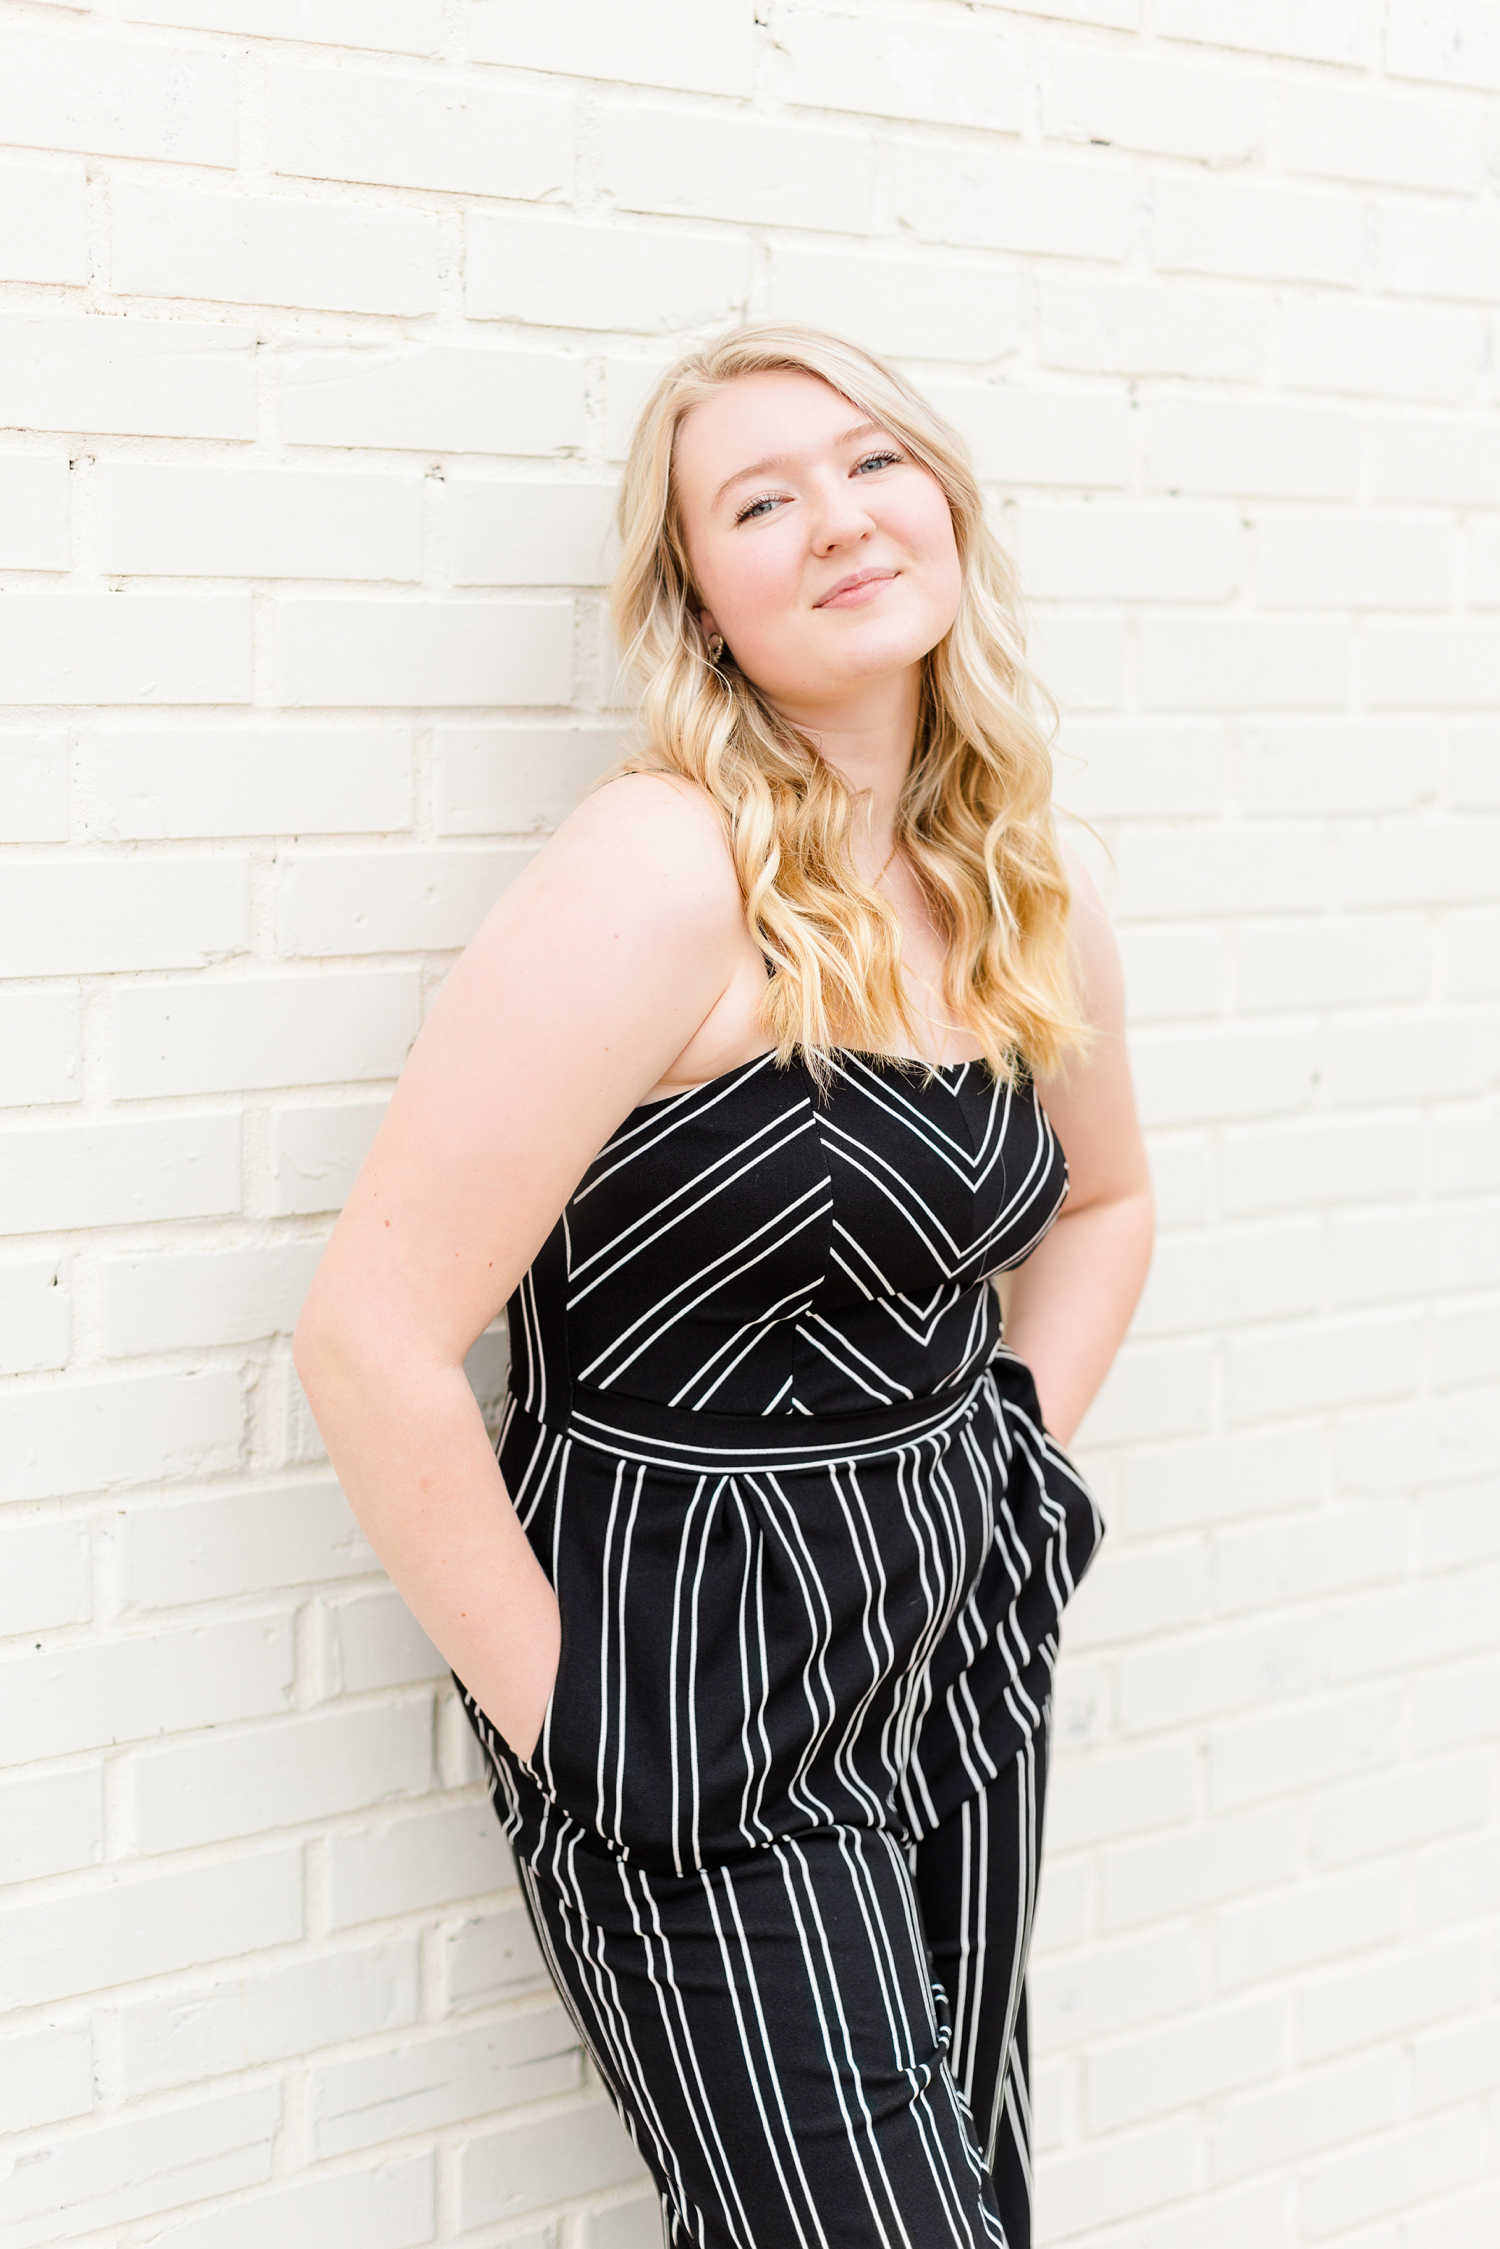 Jayden, wearing a black with white pinstripe, leans against a white brick wall in downtown Algona, IA | CB Studio